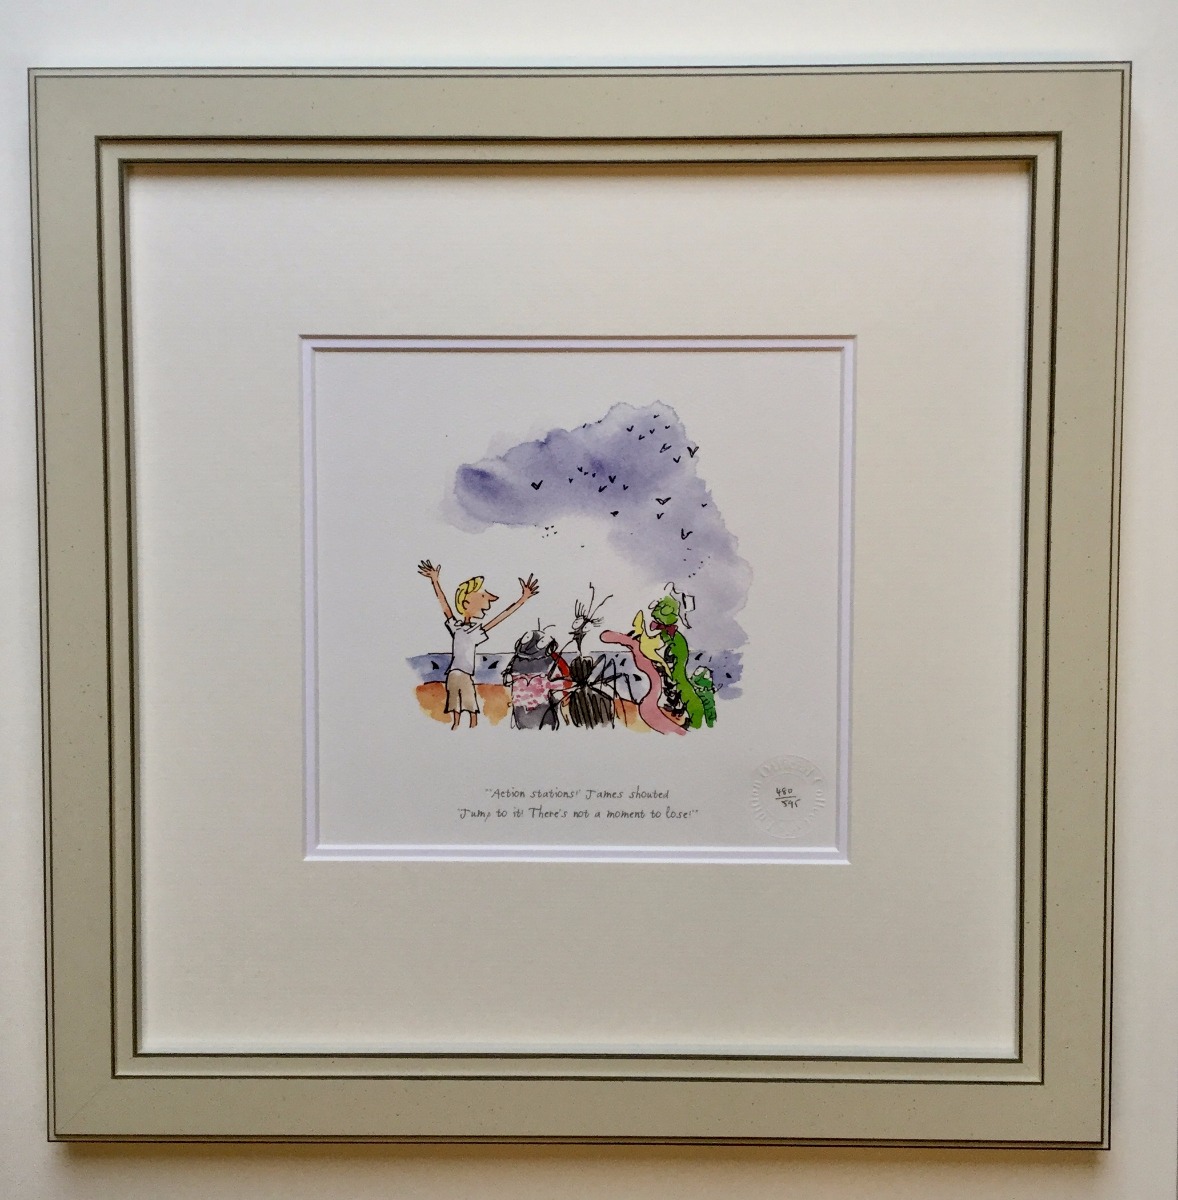 Action Stations! - James Shouted by Quentin Blake, Children | Family | Peach